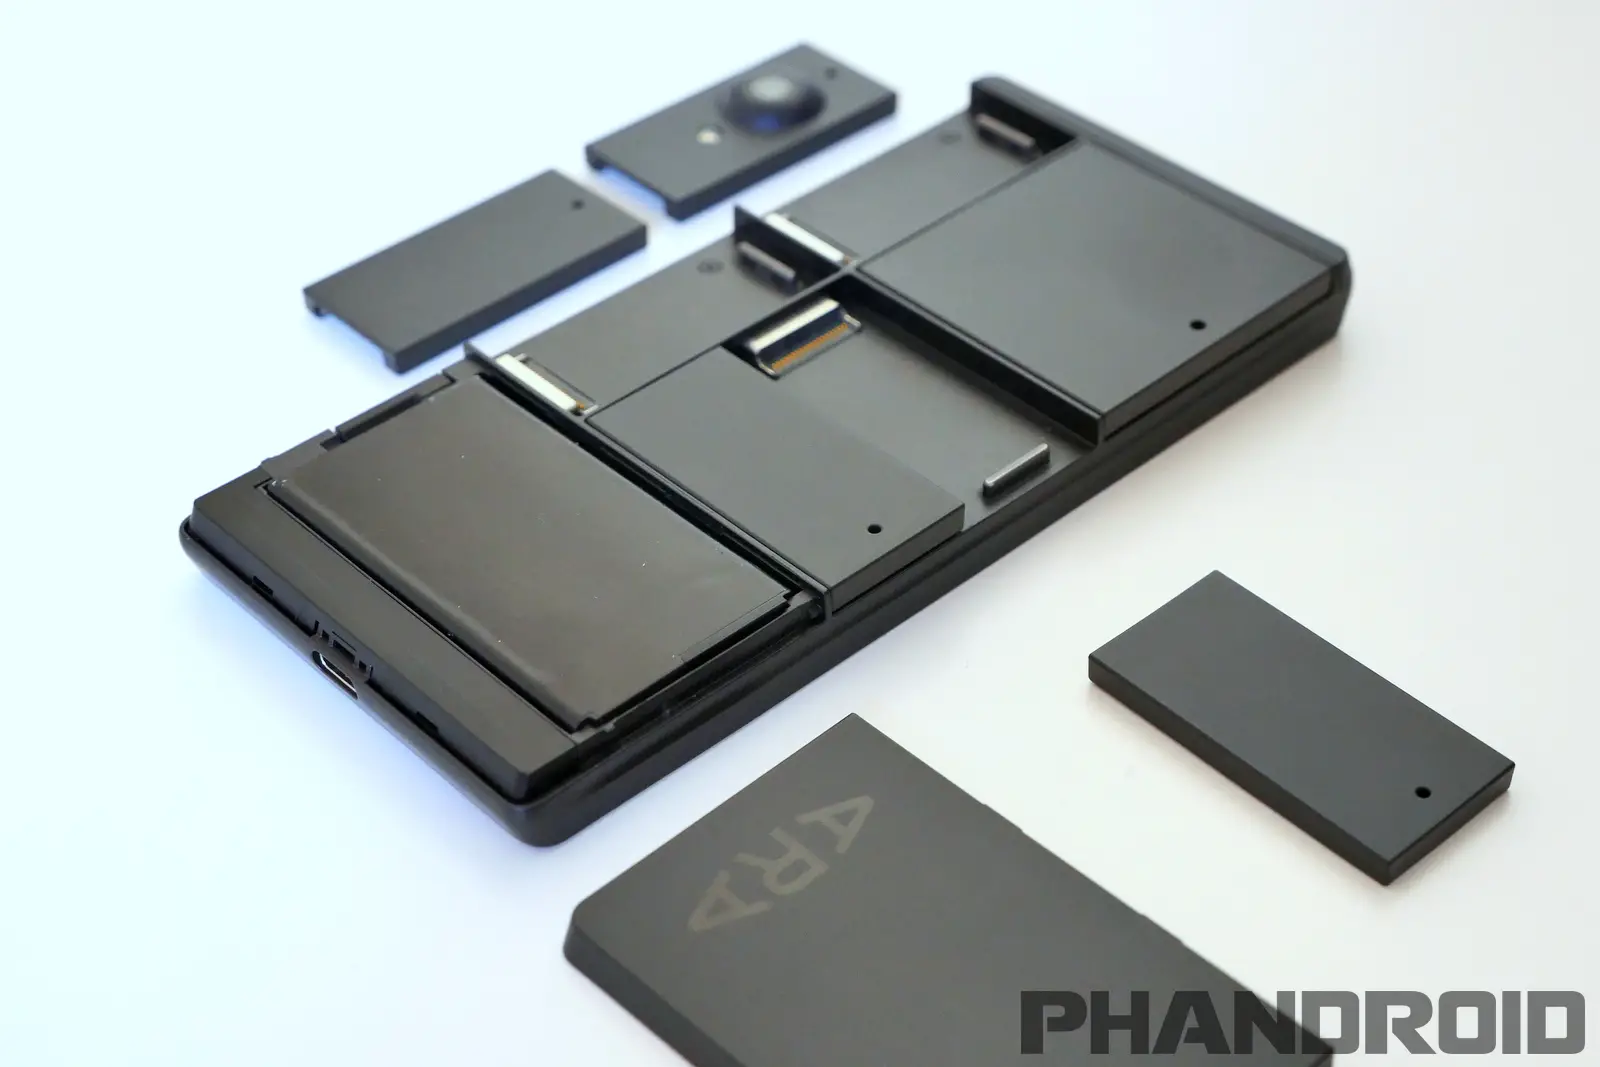 Email siv Uventet Exclusive: Project ARA specifications, design and photos – Phandroid